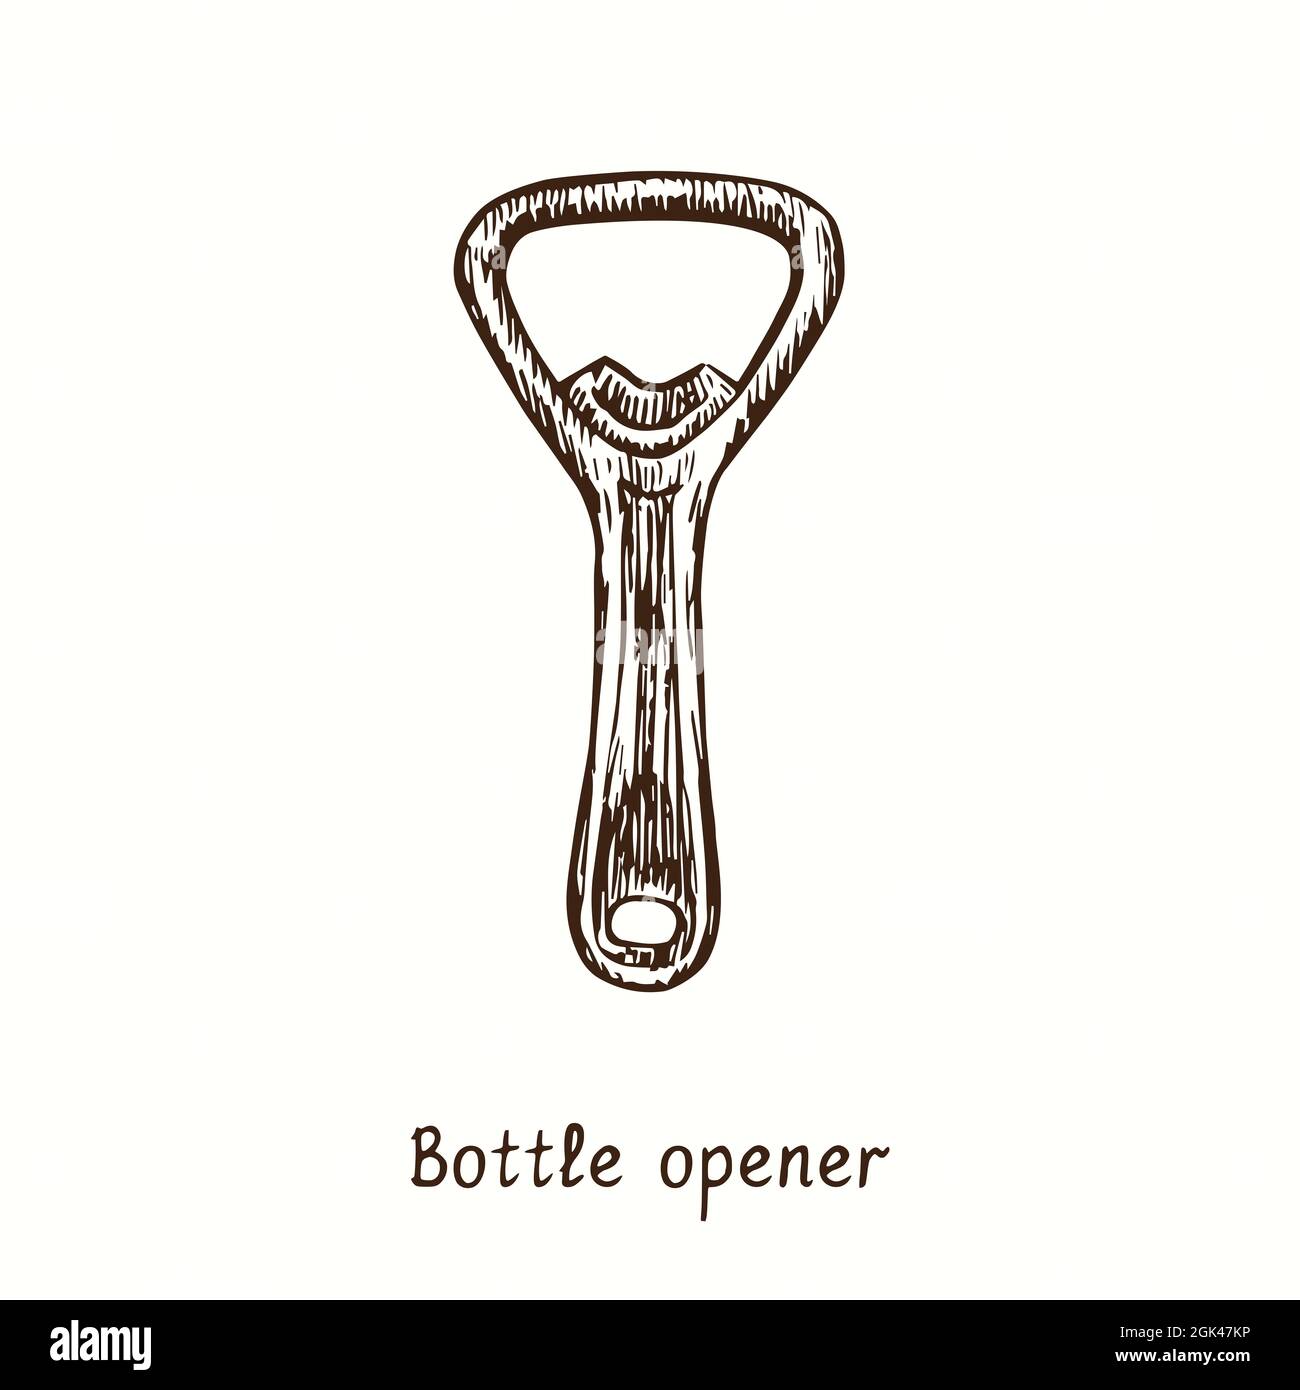 Bottle opener. Ink black and white doodle drawing in woodcut style. Stock Photo